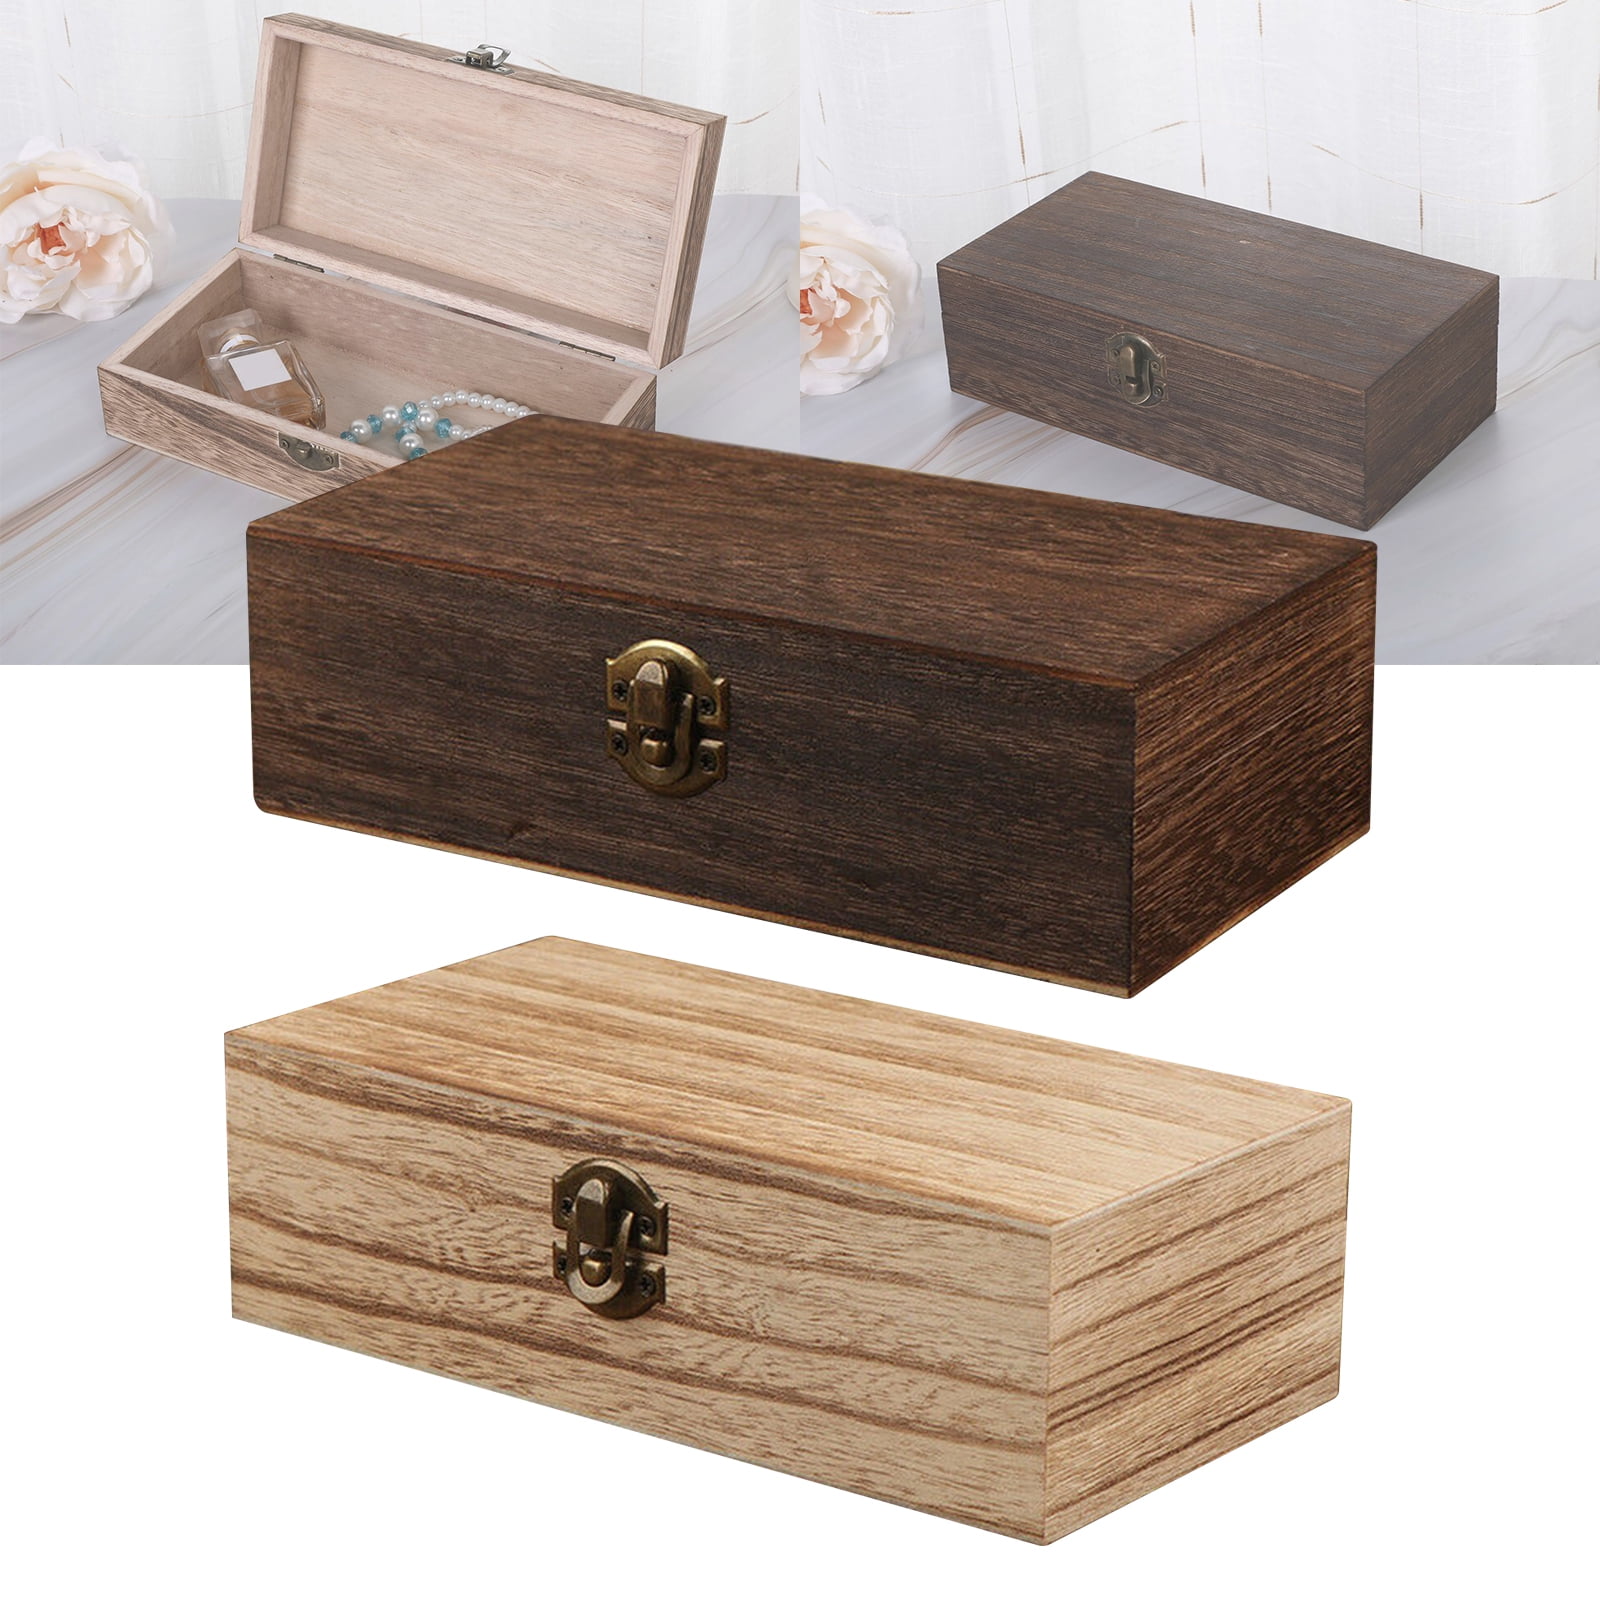 Wooden Square Box Crate Christmas Gift Idea Jewelry Keepsake Storage Lid Clasp 